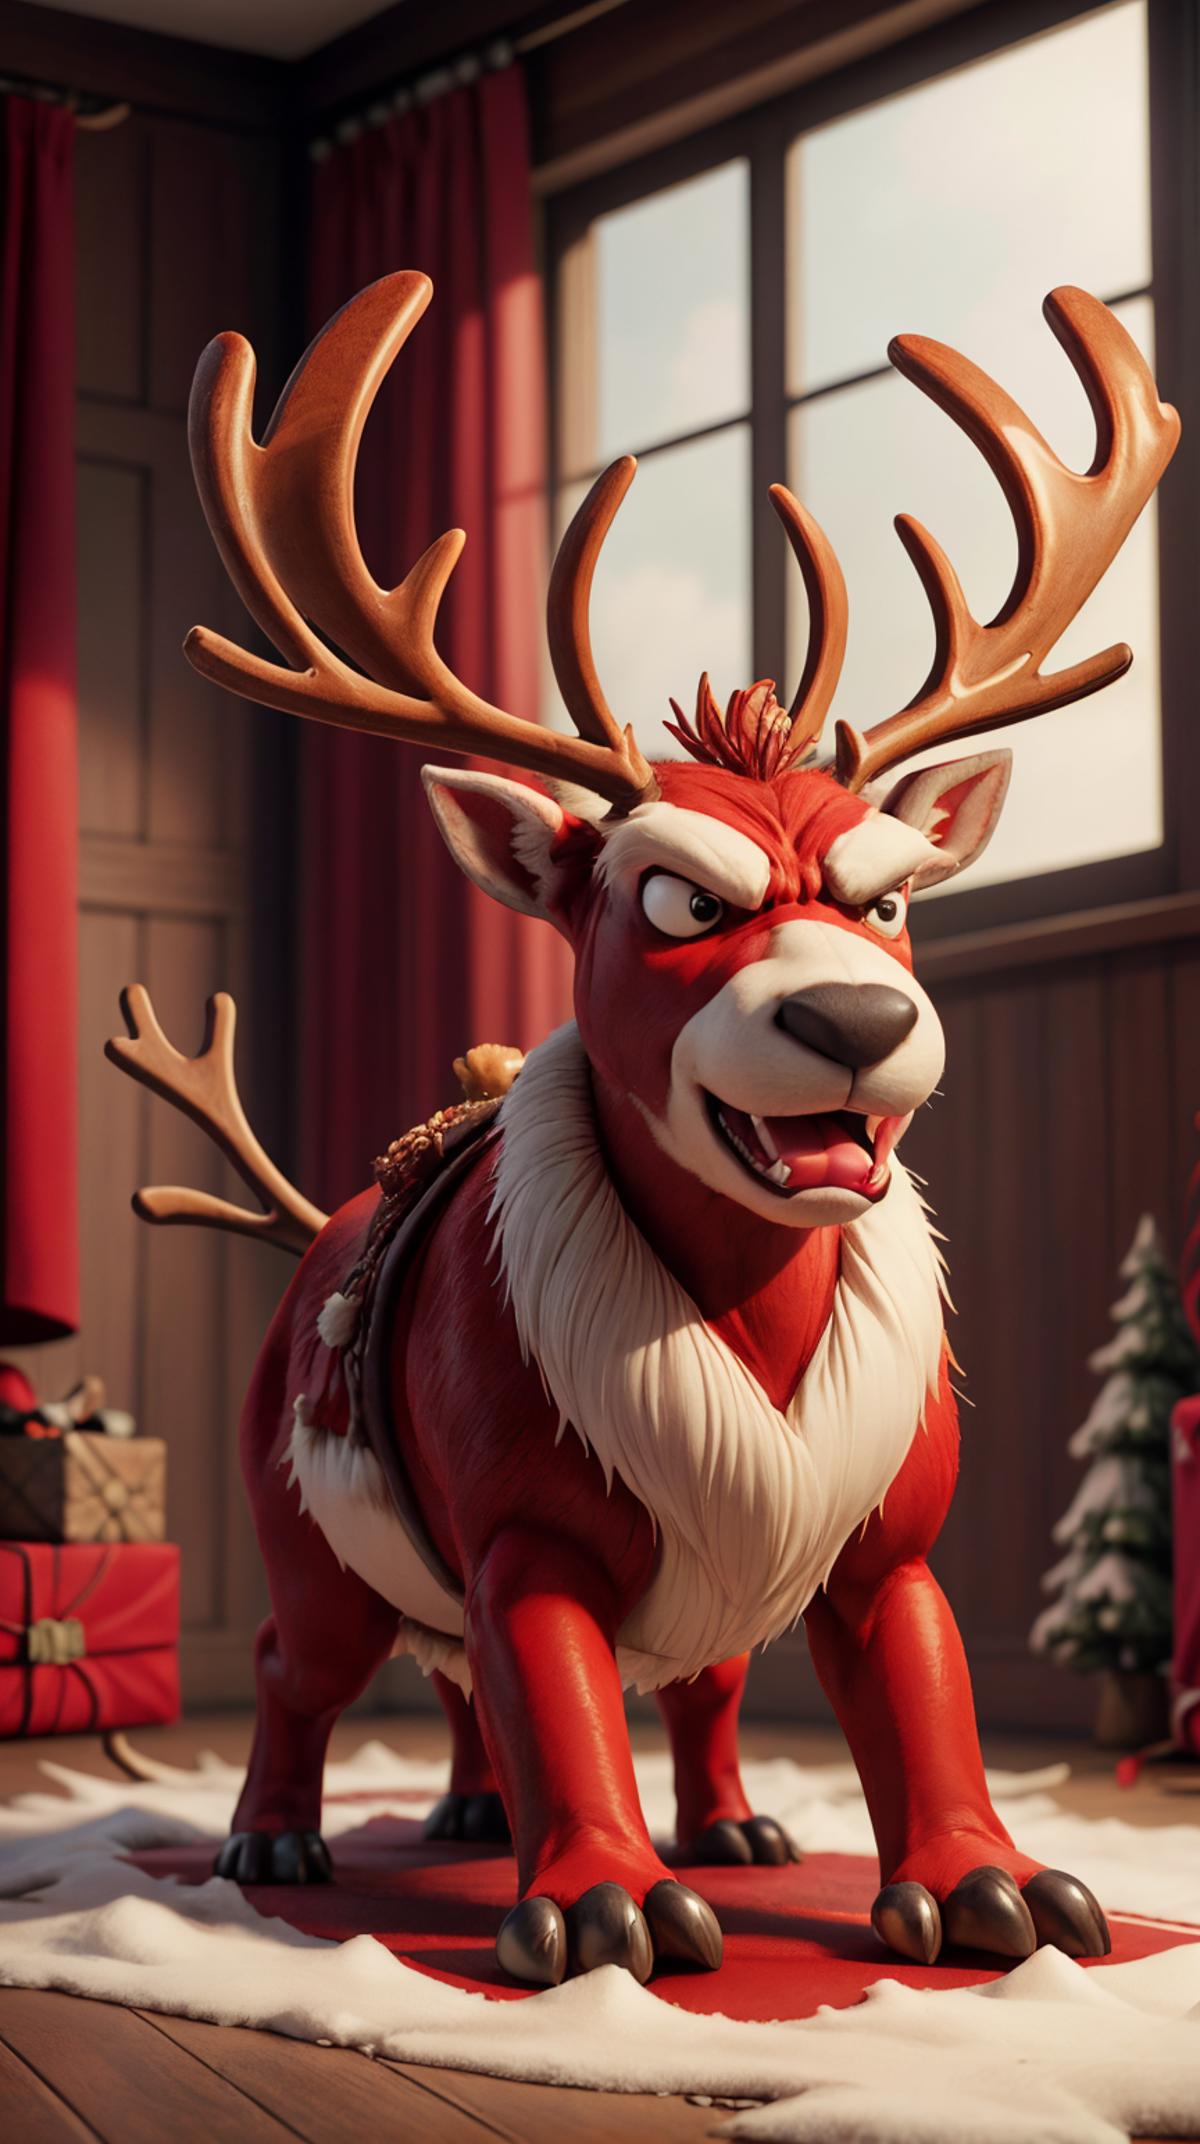 A Red and White Reindeer Toy with Angry Expression.